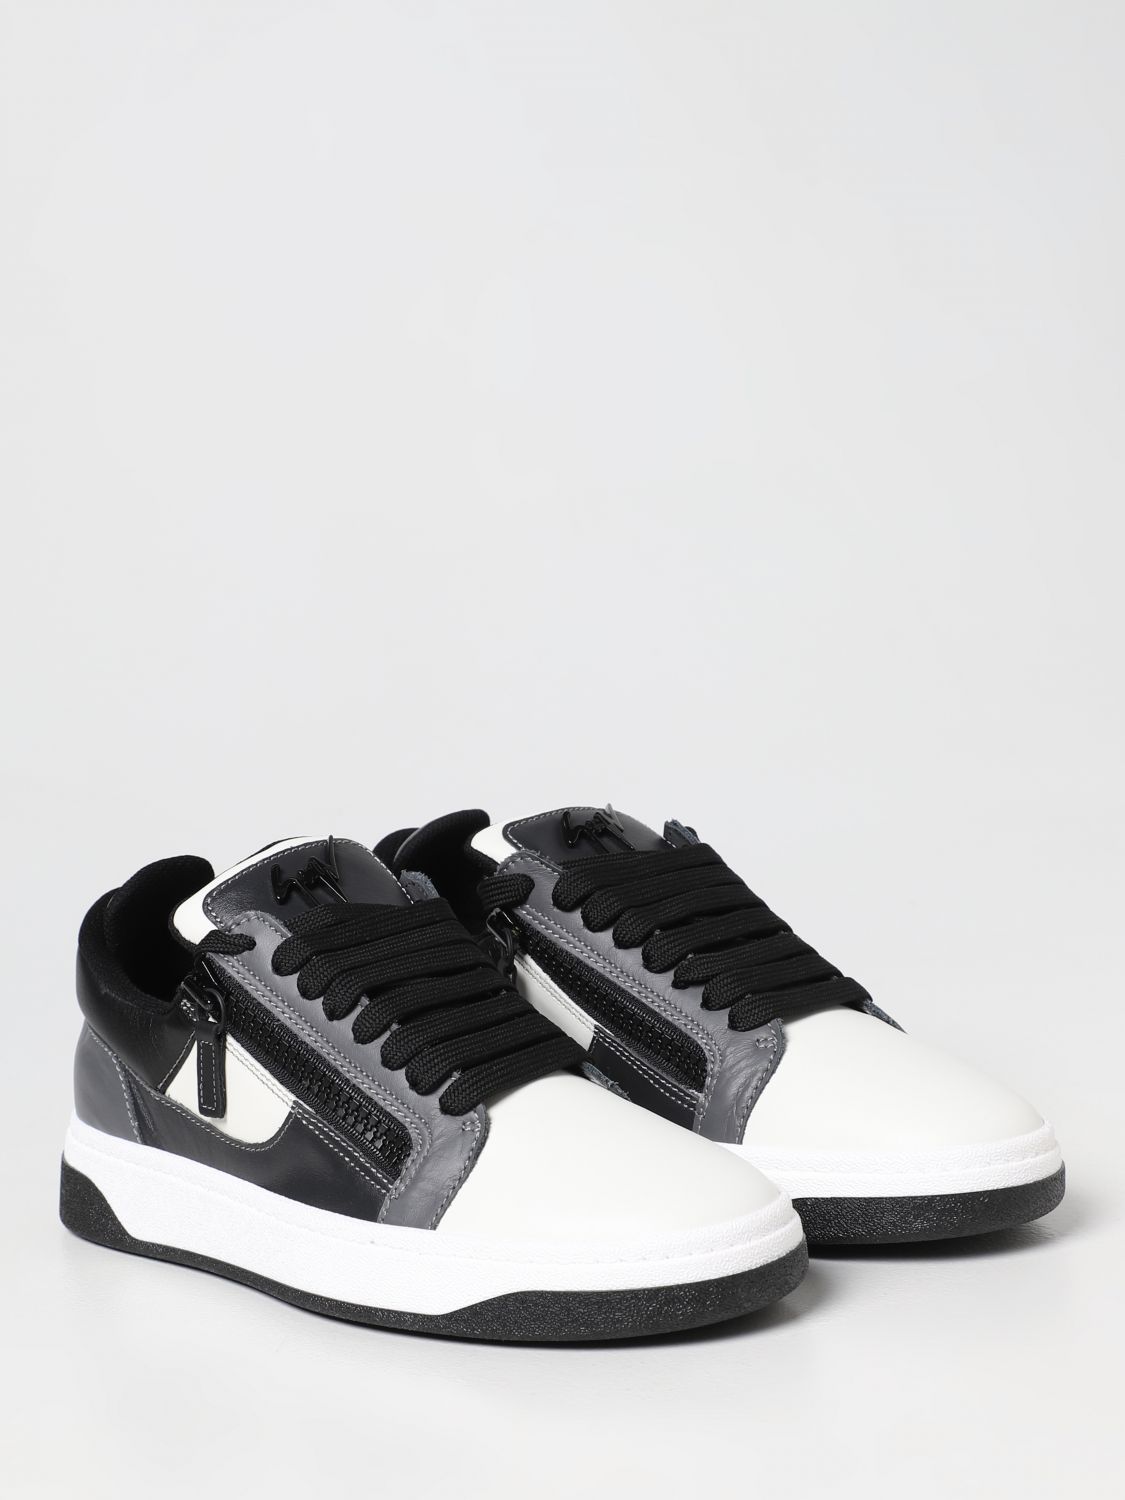 GIUSEPPE ZANOTTI GZ94 White Leather Browns Shoes, 47% OFF